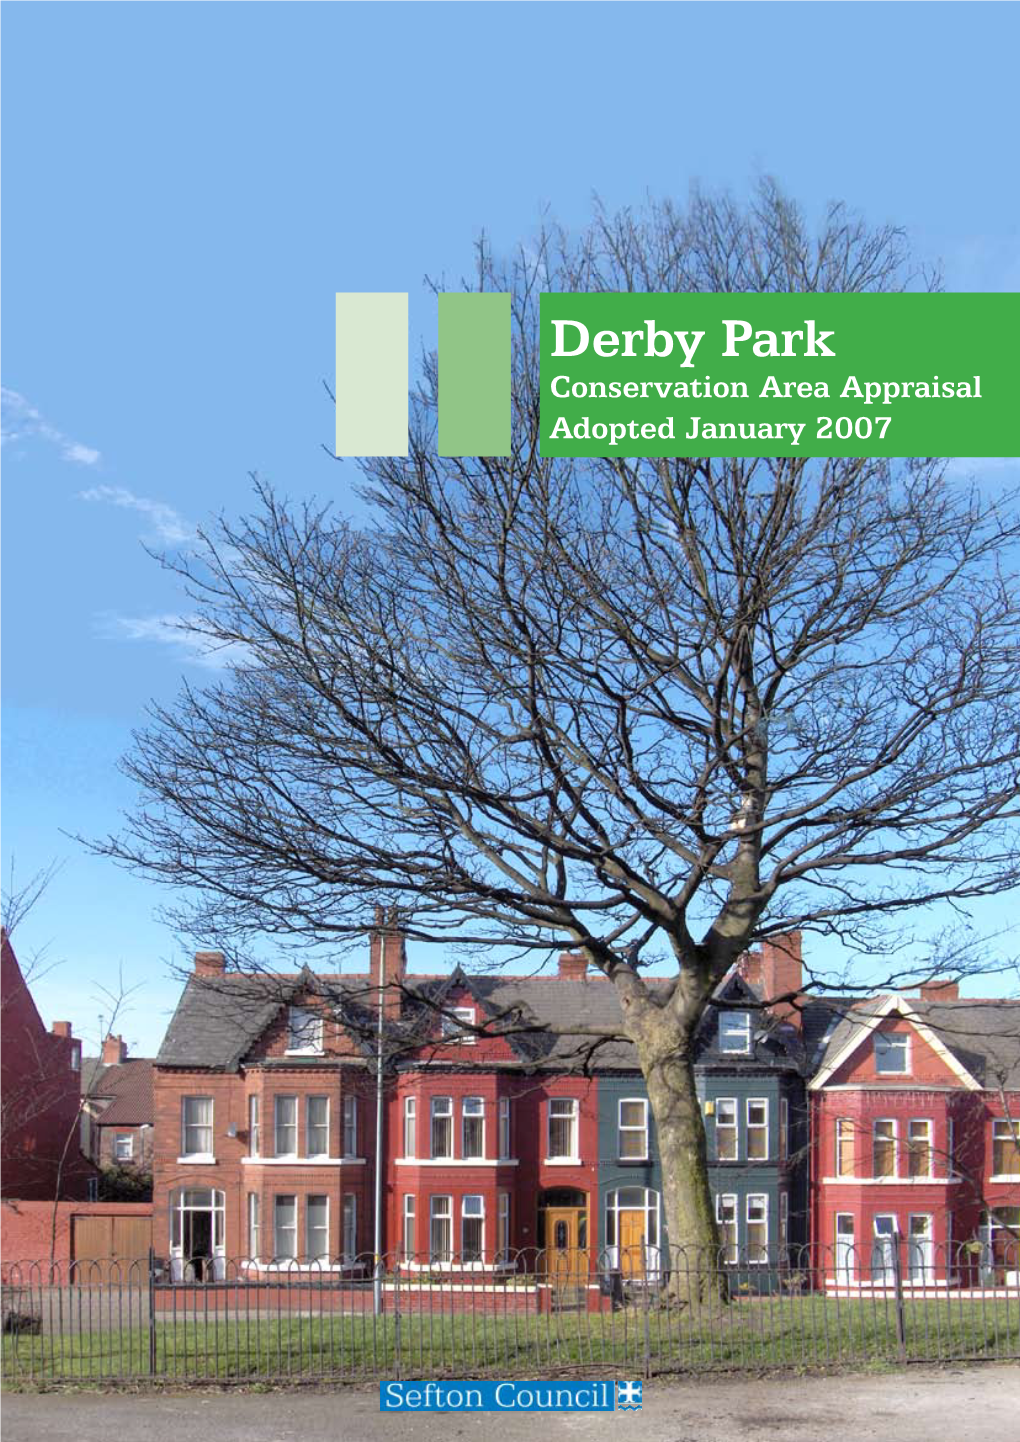 Derby Park Conservation Area Appraisal Adopted January 2007